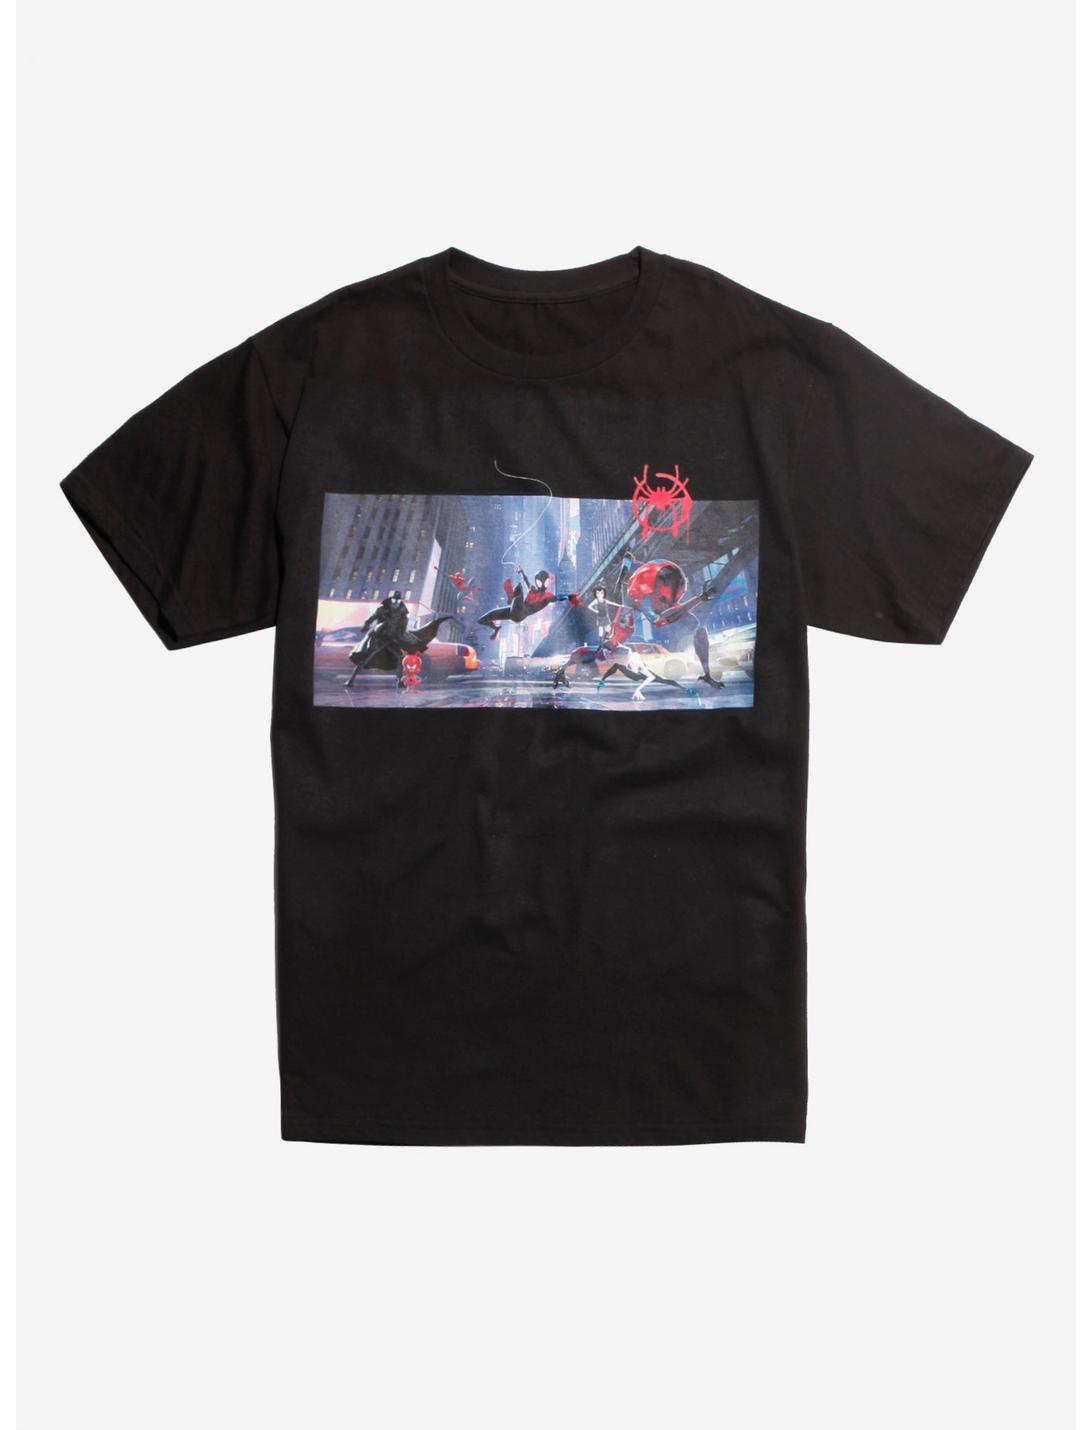 Marvel Spider-Man: Into The Spider-Verse Spider-Heroes Group T-Shirt, MULTI, hi-res